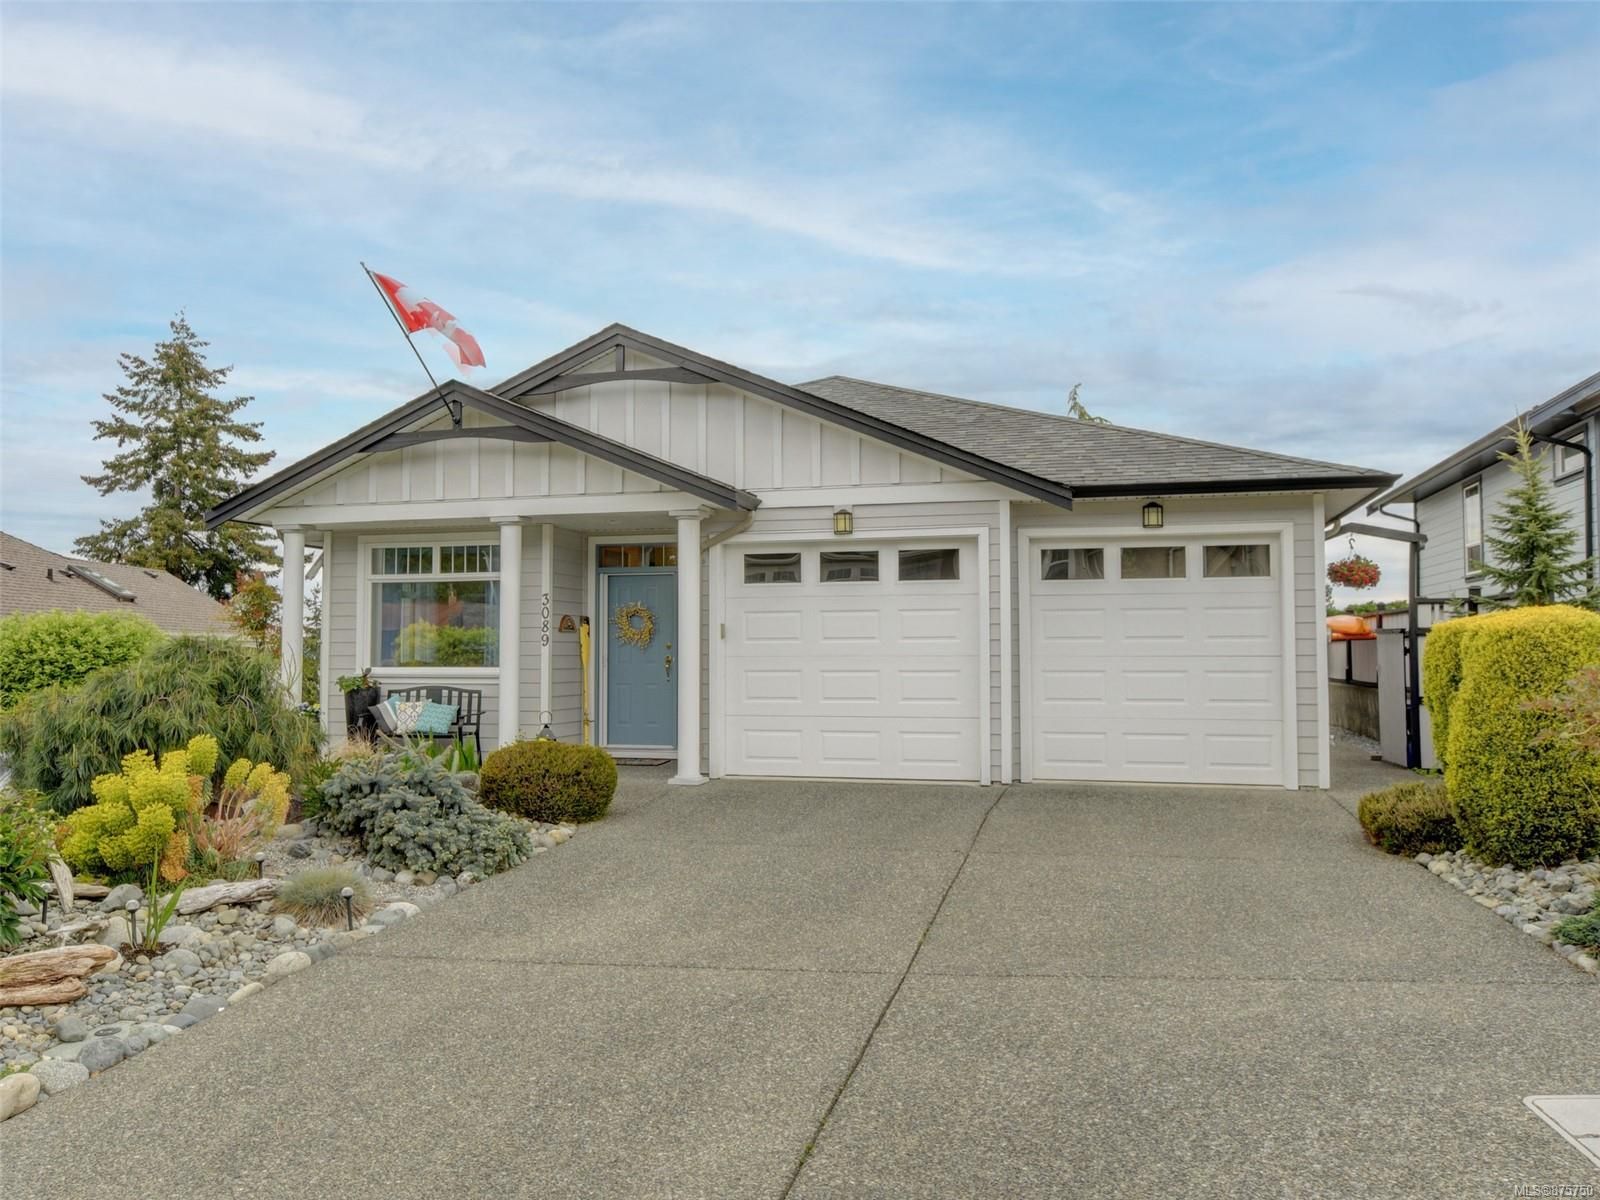 New property listed in Du Chemainus, Duncan